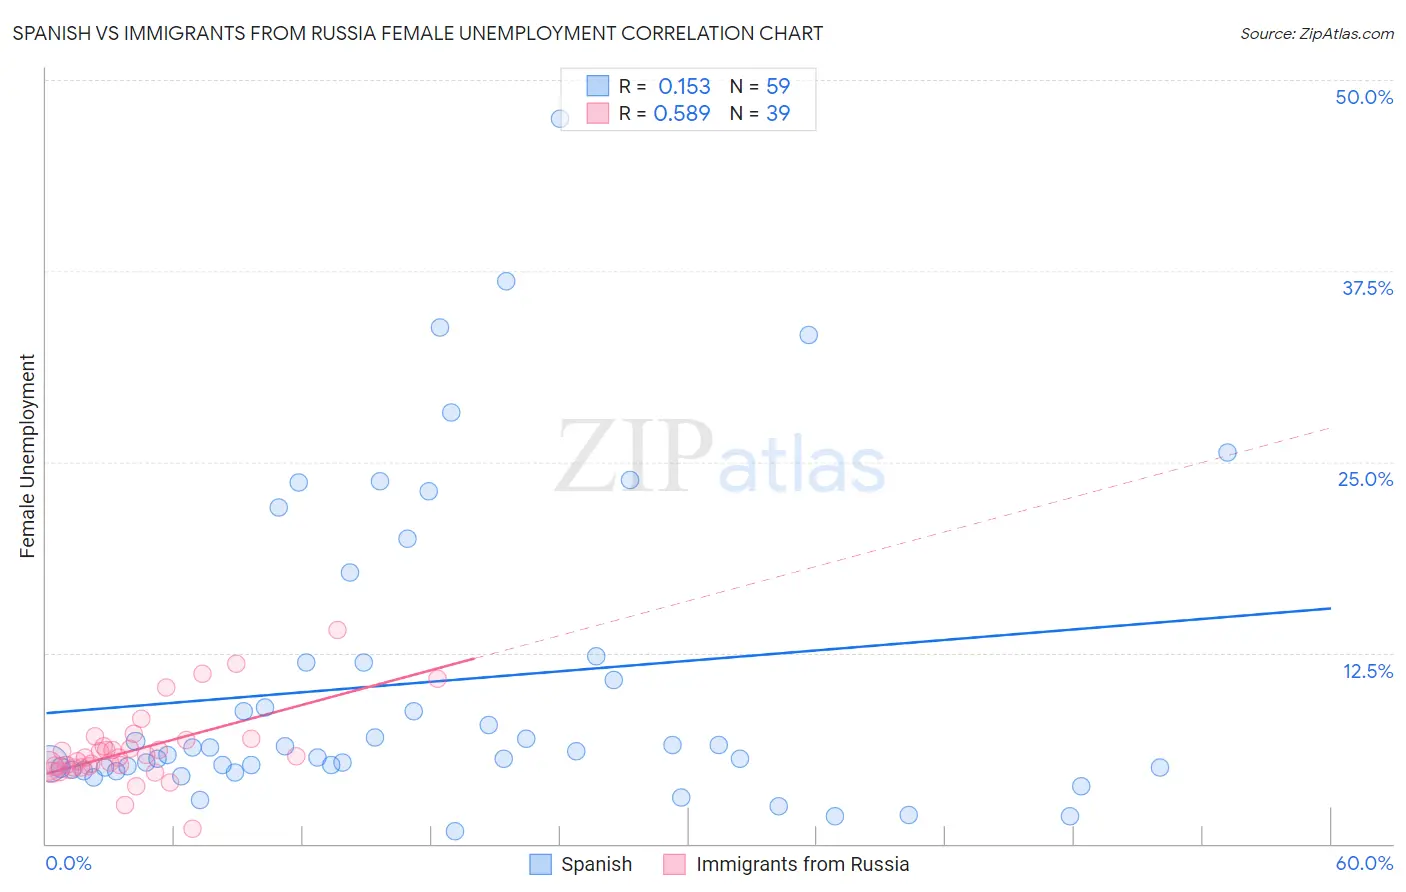 Spanish vs Immigrants from Russia Female Unemployment